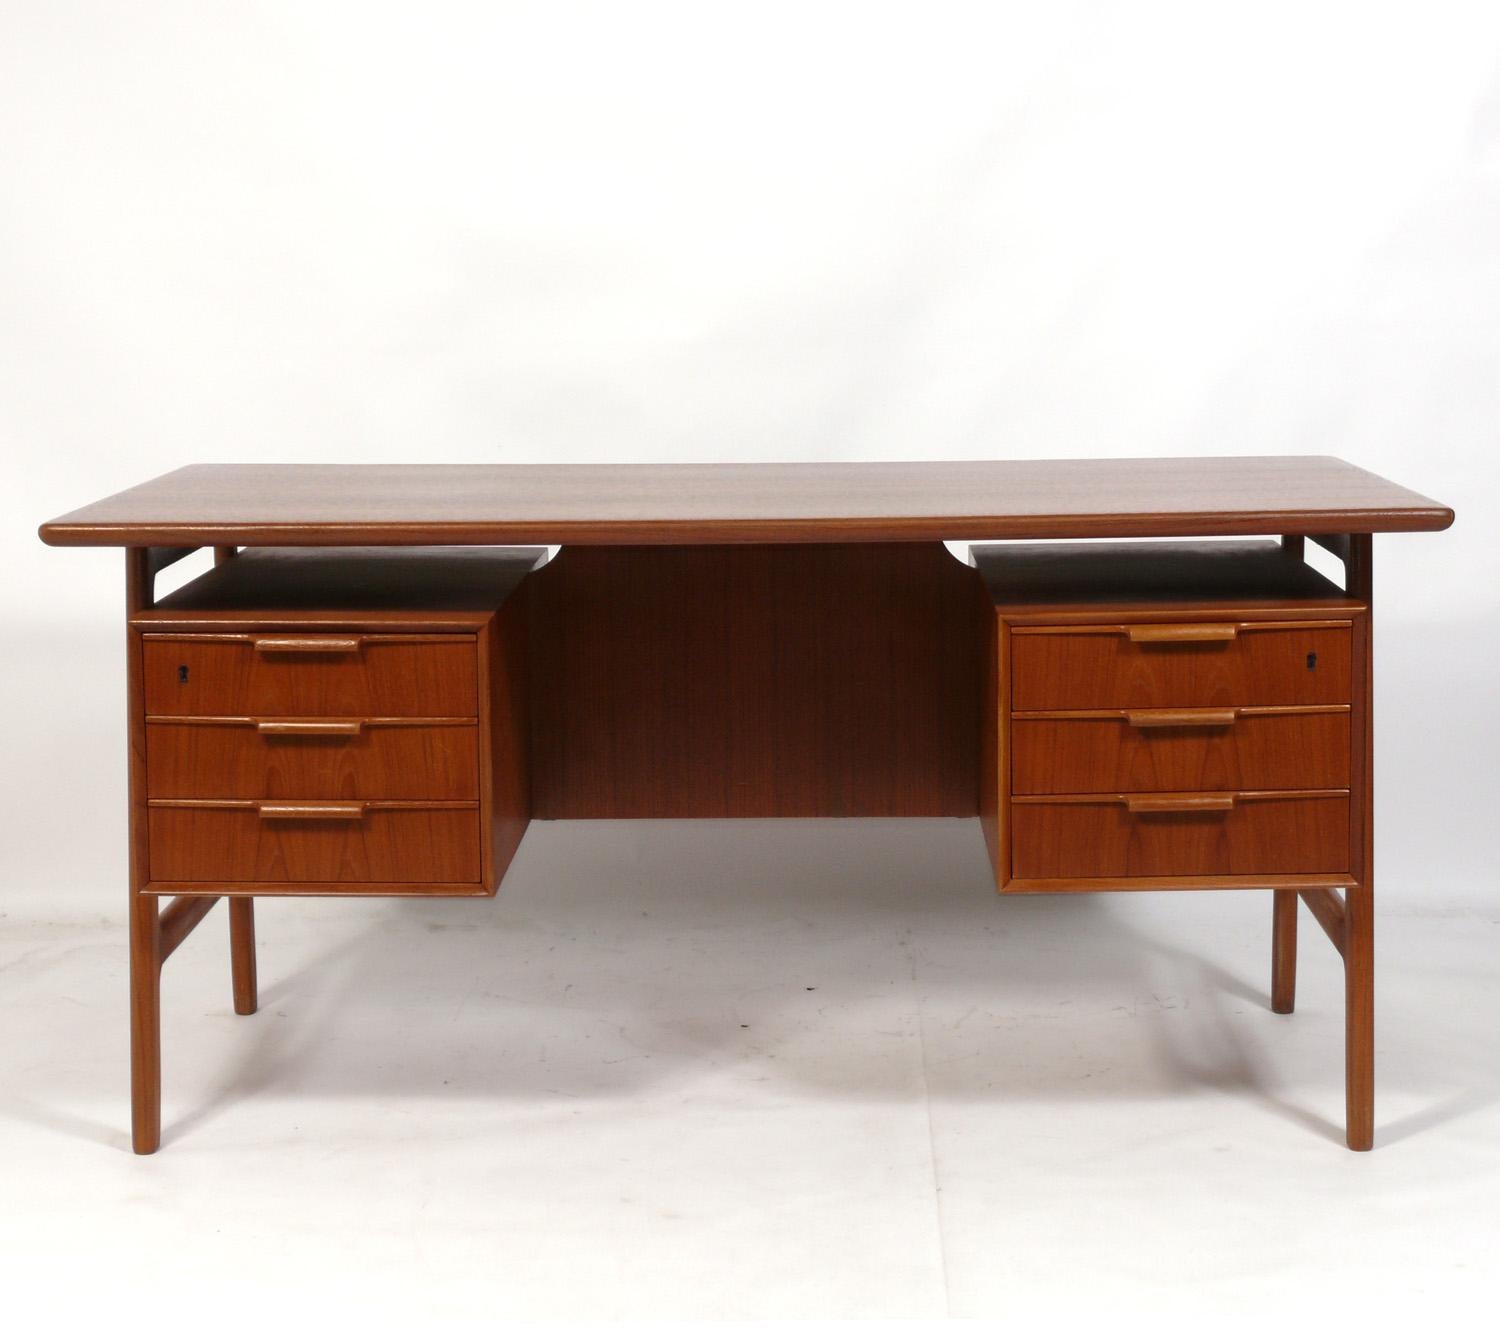 Clean lined Danish modern teak desk, designed by Gunni Omann for Jun Mobelfabrik, Denmark, circa 1960s. It has recently been refinished and is ready to use. Wonderful design that is finished on both sides with bookshelves and a cabinet on the back